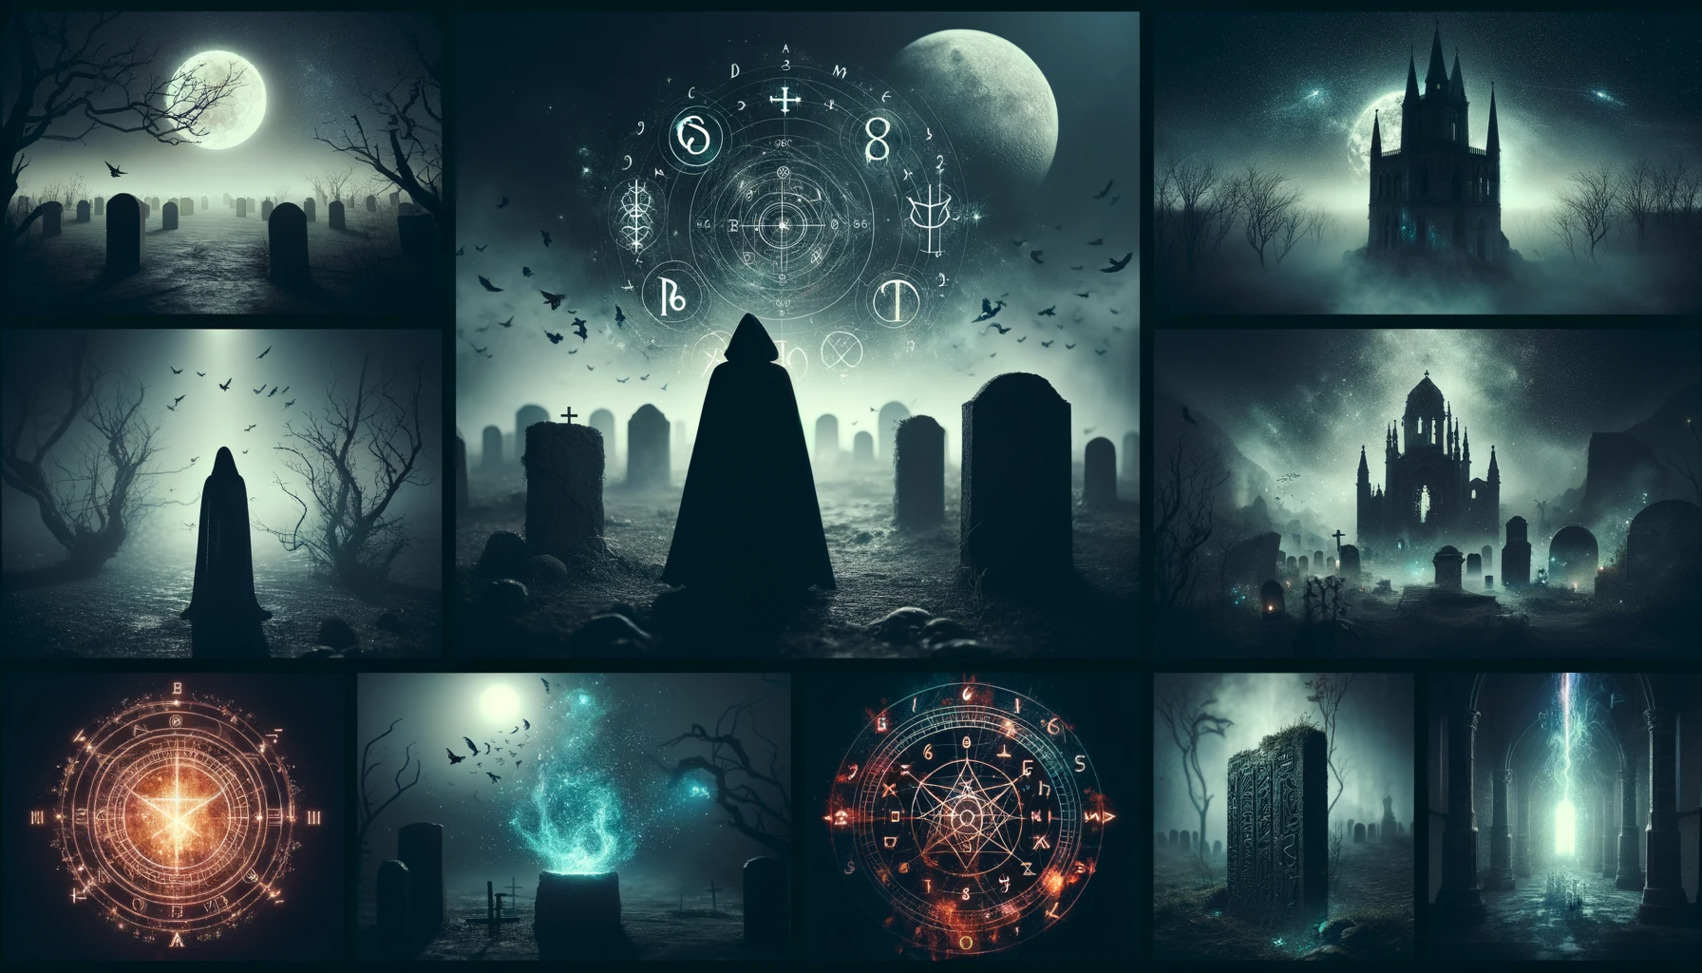 a cinematic image capturing the dark and mystical essence associated with the concept of 'necromancer names', featuring elements like a foggy graveyard, ethereal lights, and a decrepit castle under a moonlit sky.